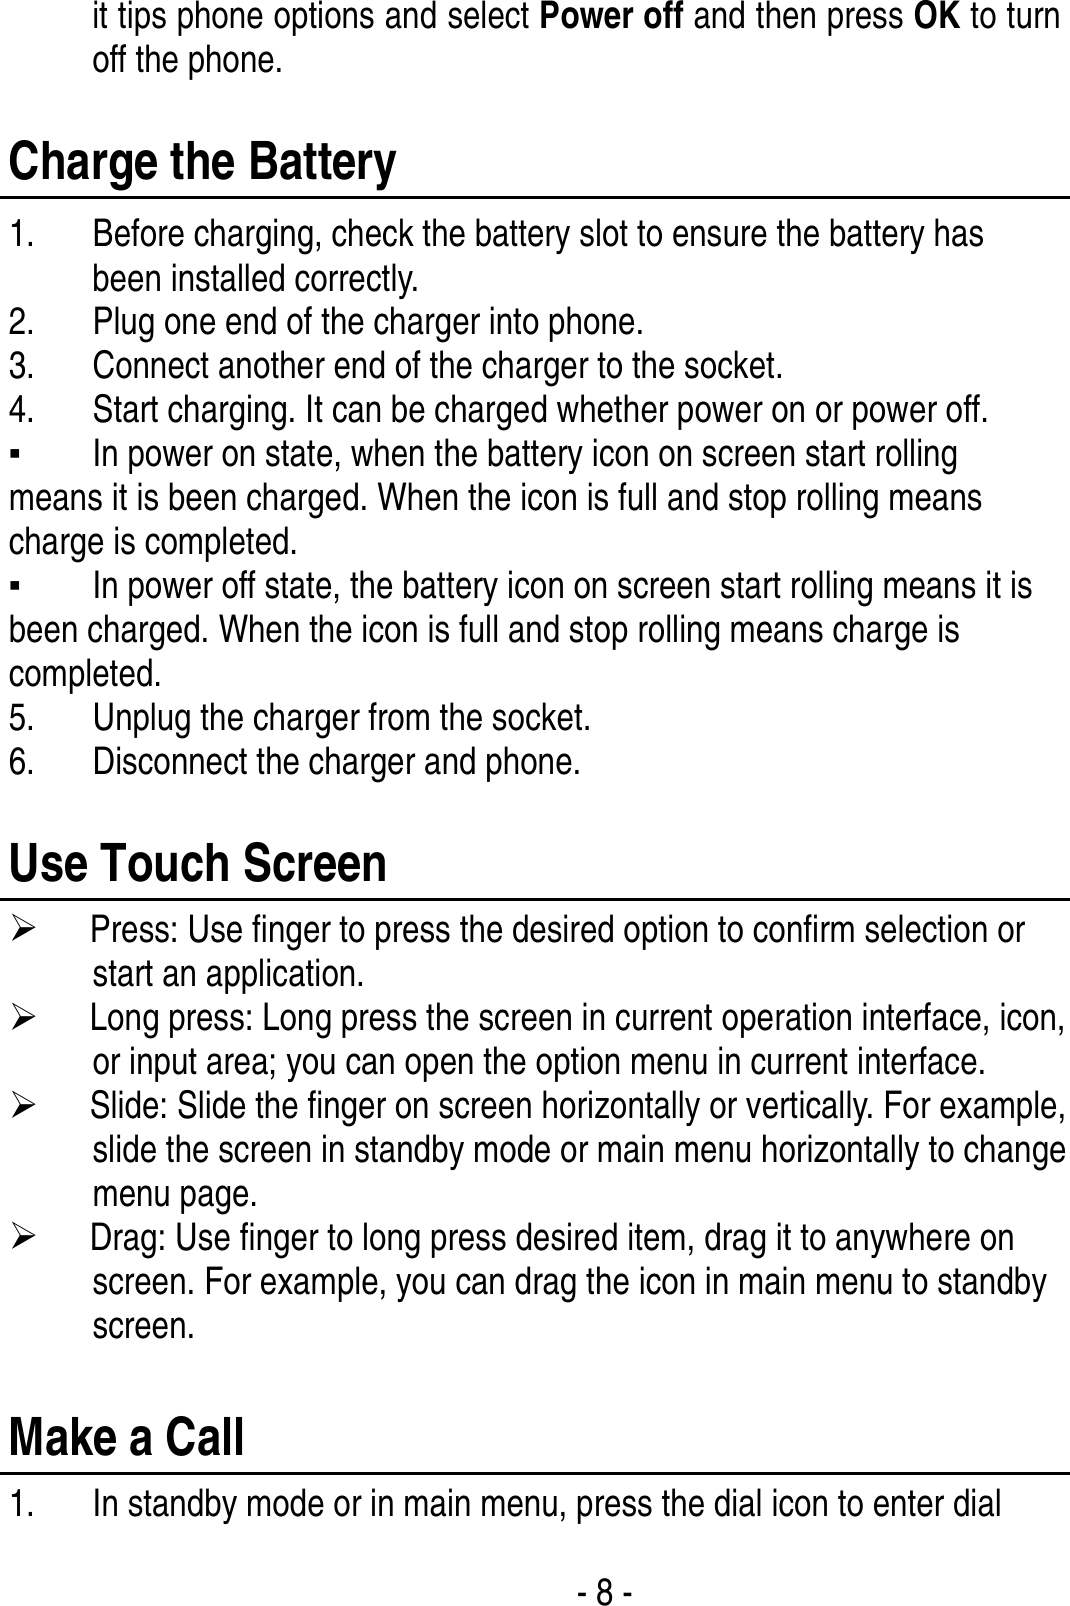  - 8 - it tips phone options and select Power off and then press OK to turn off the phone.    Charge the Battery   1. Before charging, check the battery slot to ensure the battery has been installed correctly. 2. Plug one end of the charger into phone. 3. Connect another end of the charger to the socket. 4. Start charging. It can be charged whether power on or power off.   ▪ In power on state, when the battery icon on screen start rolling means it is been charged. When the icon is full and stop rolling means charge is completed.   ▪ In power off state, the battery icon on screen start rolling means it is been charged. When the icon is full and stop rolling means charge is completed. 5. Unplug the charger from the socket.   6. Disconnect the charger and phone.    Use Touch Screen ¾ Press: Use finger to press the desired option to confirm selection or start an application. ¾ Long press: Long press the screen in current operation interface, icon, or input area; you can open the option menu in current interface. ¾ Slide: Slide the finger on screen horizontally or vertically. For example, slide the screen in standby mode or main menu horizontally to change menu page. ¾ Drag: Use finger to long press desired item, drag it to anywhere on screen. For example, you can drag the icon in main menu to standby screen.  Make a Call 1. In standby mode or in main menu, press the dial icon to enter dial 